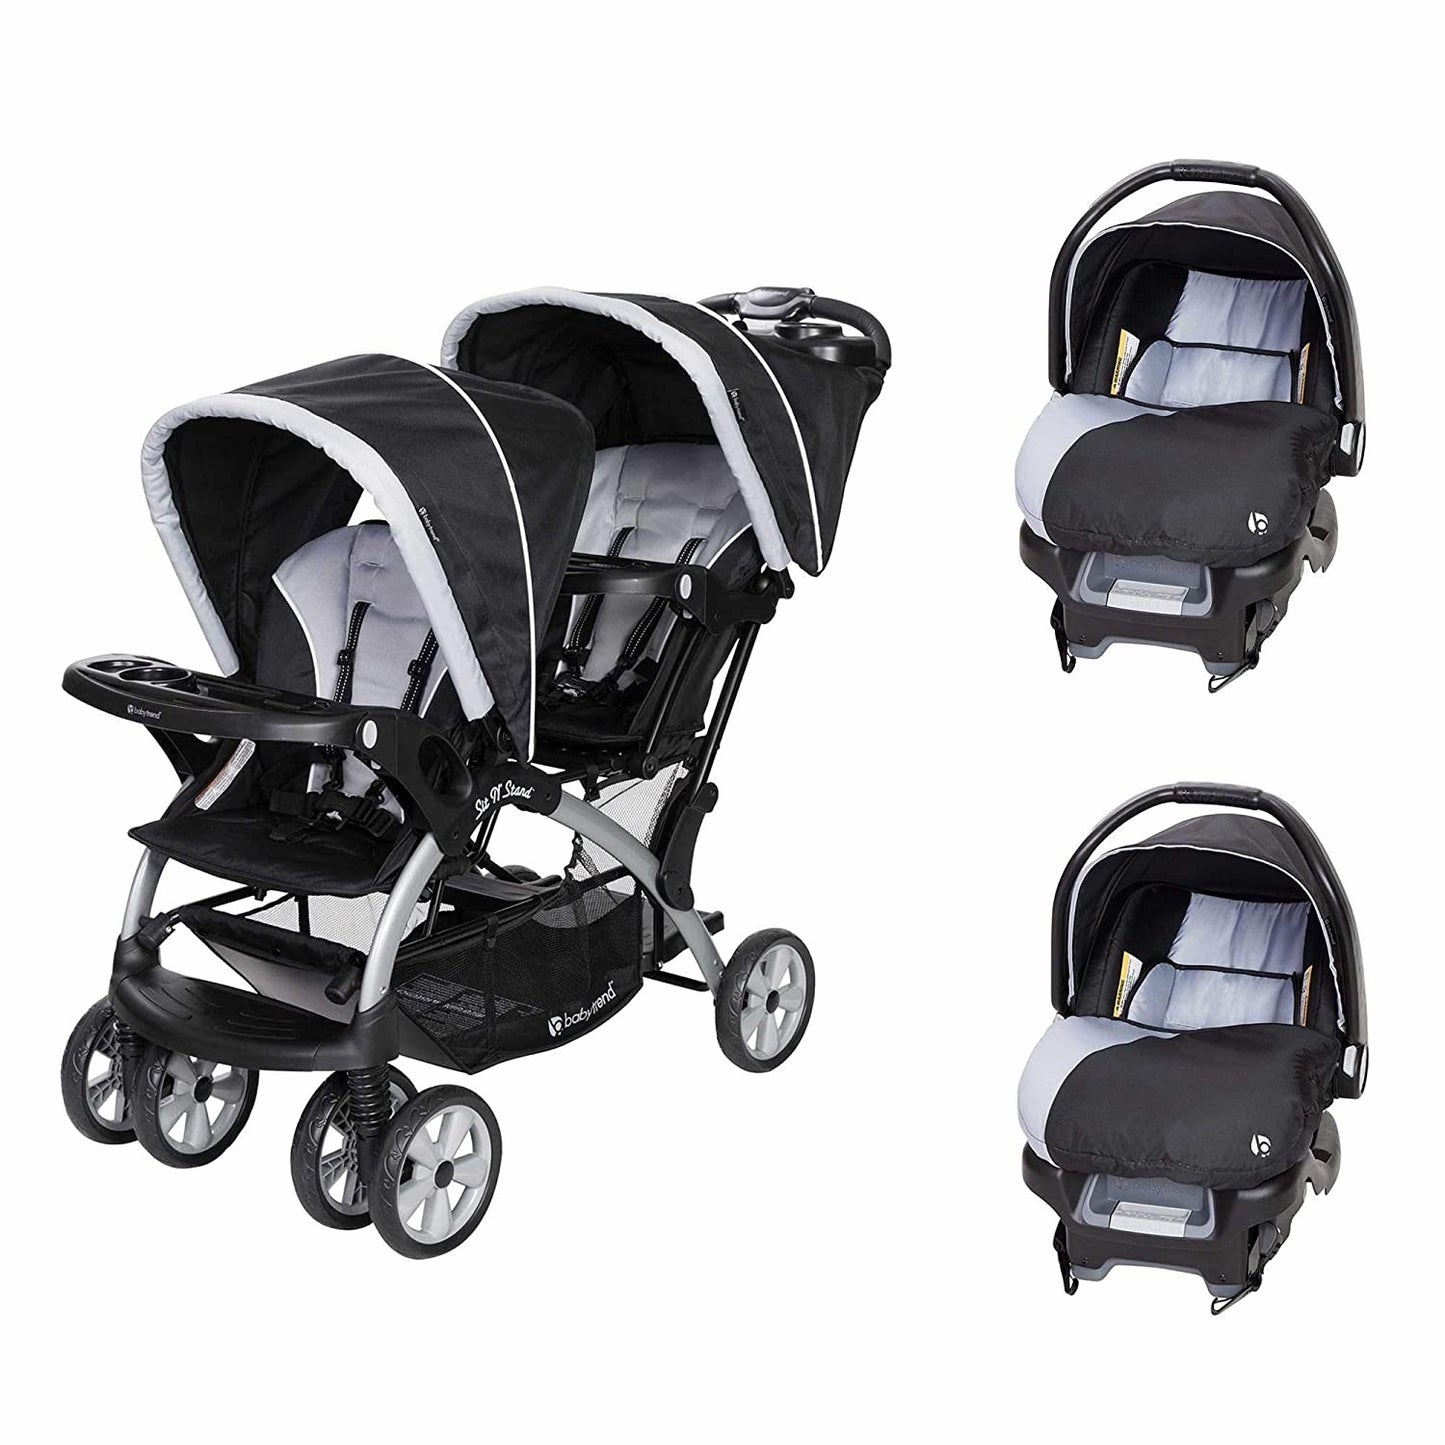 Baby Trend Twin Baby Stroller with 2 Car Seats 2 Infant Swings Twin Newborn Playard Combo